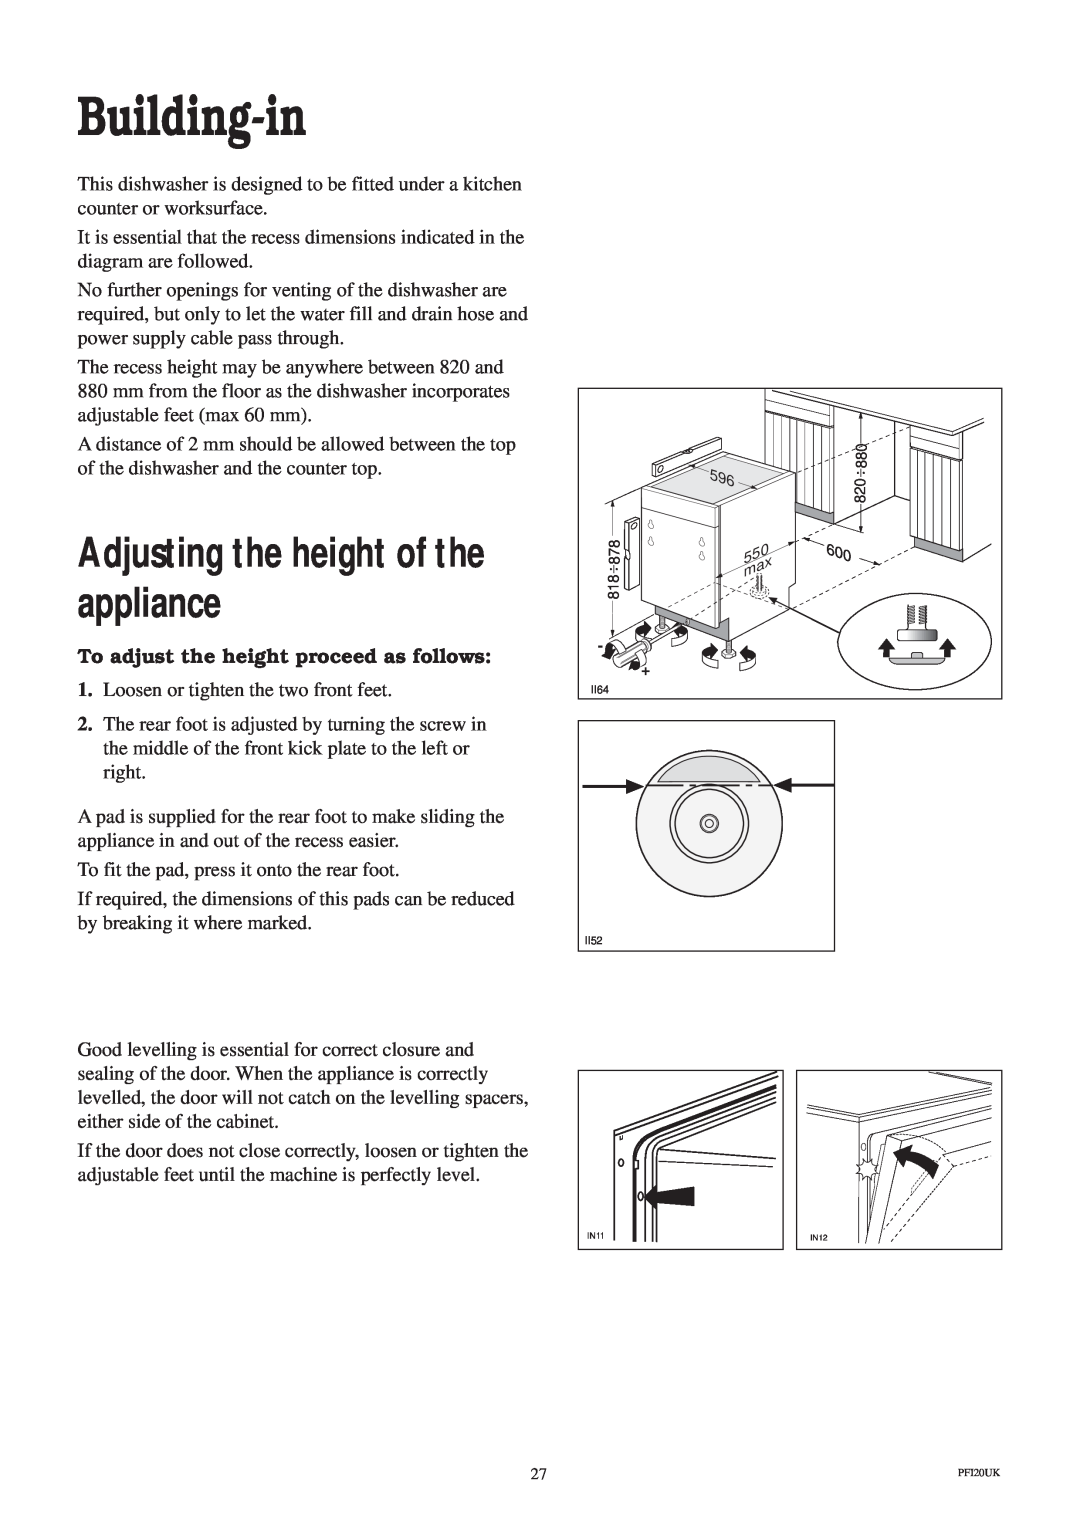 Zanussi ZT 685 manual Building-in, Adjusting the height of the appliance, To adjust the height proceed as follows 